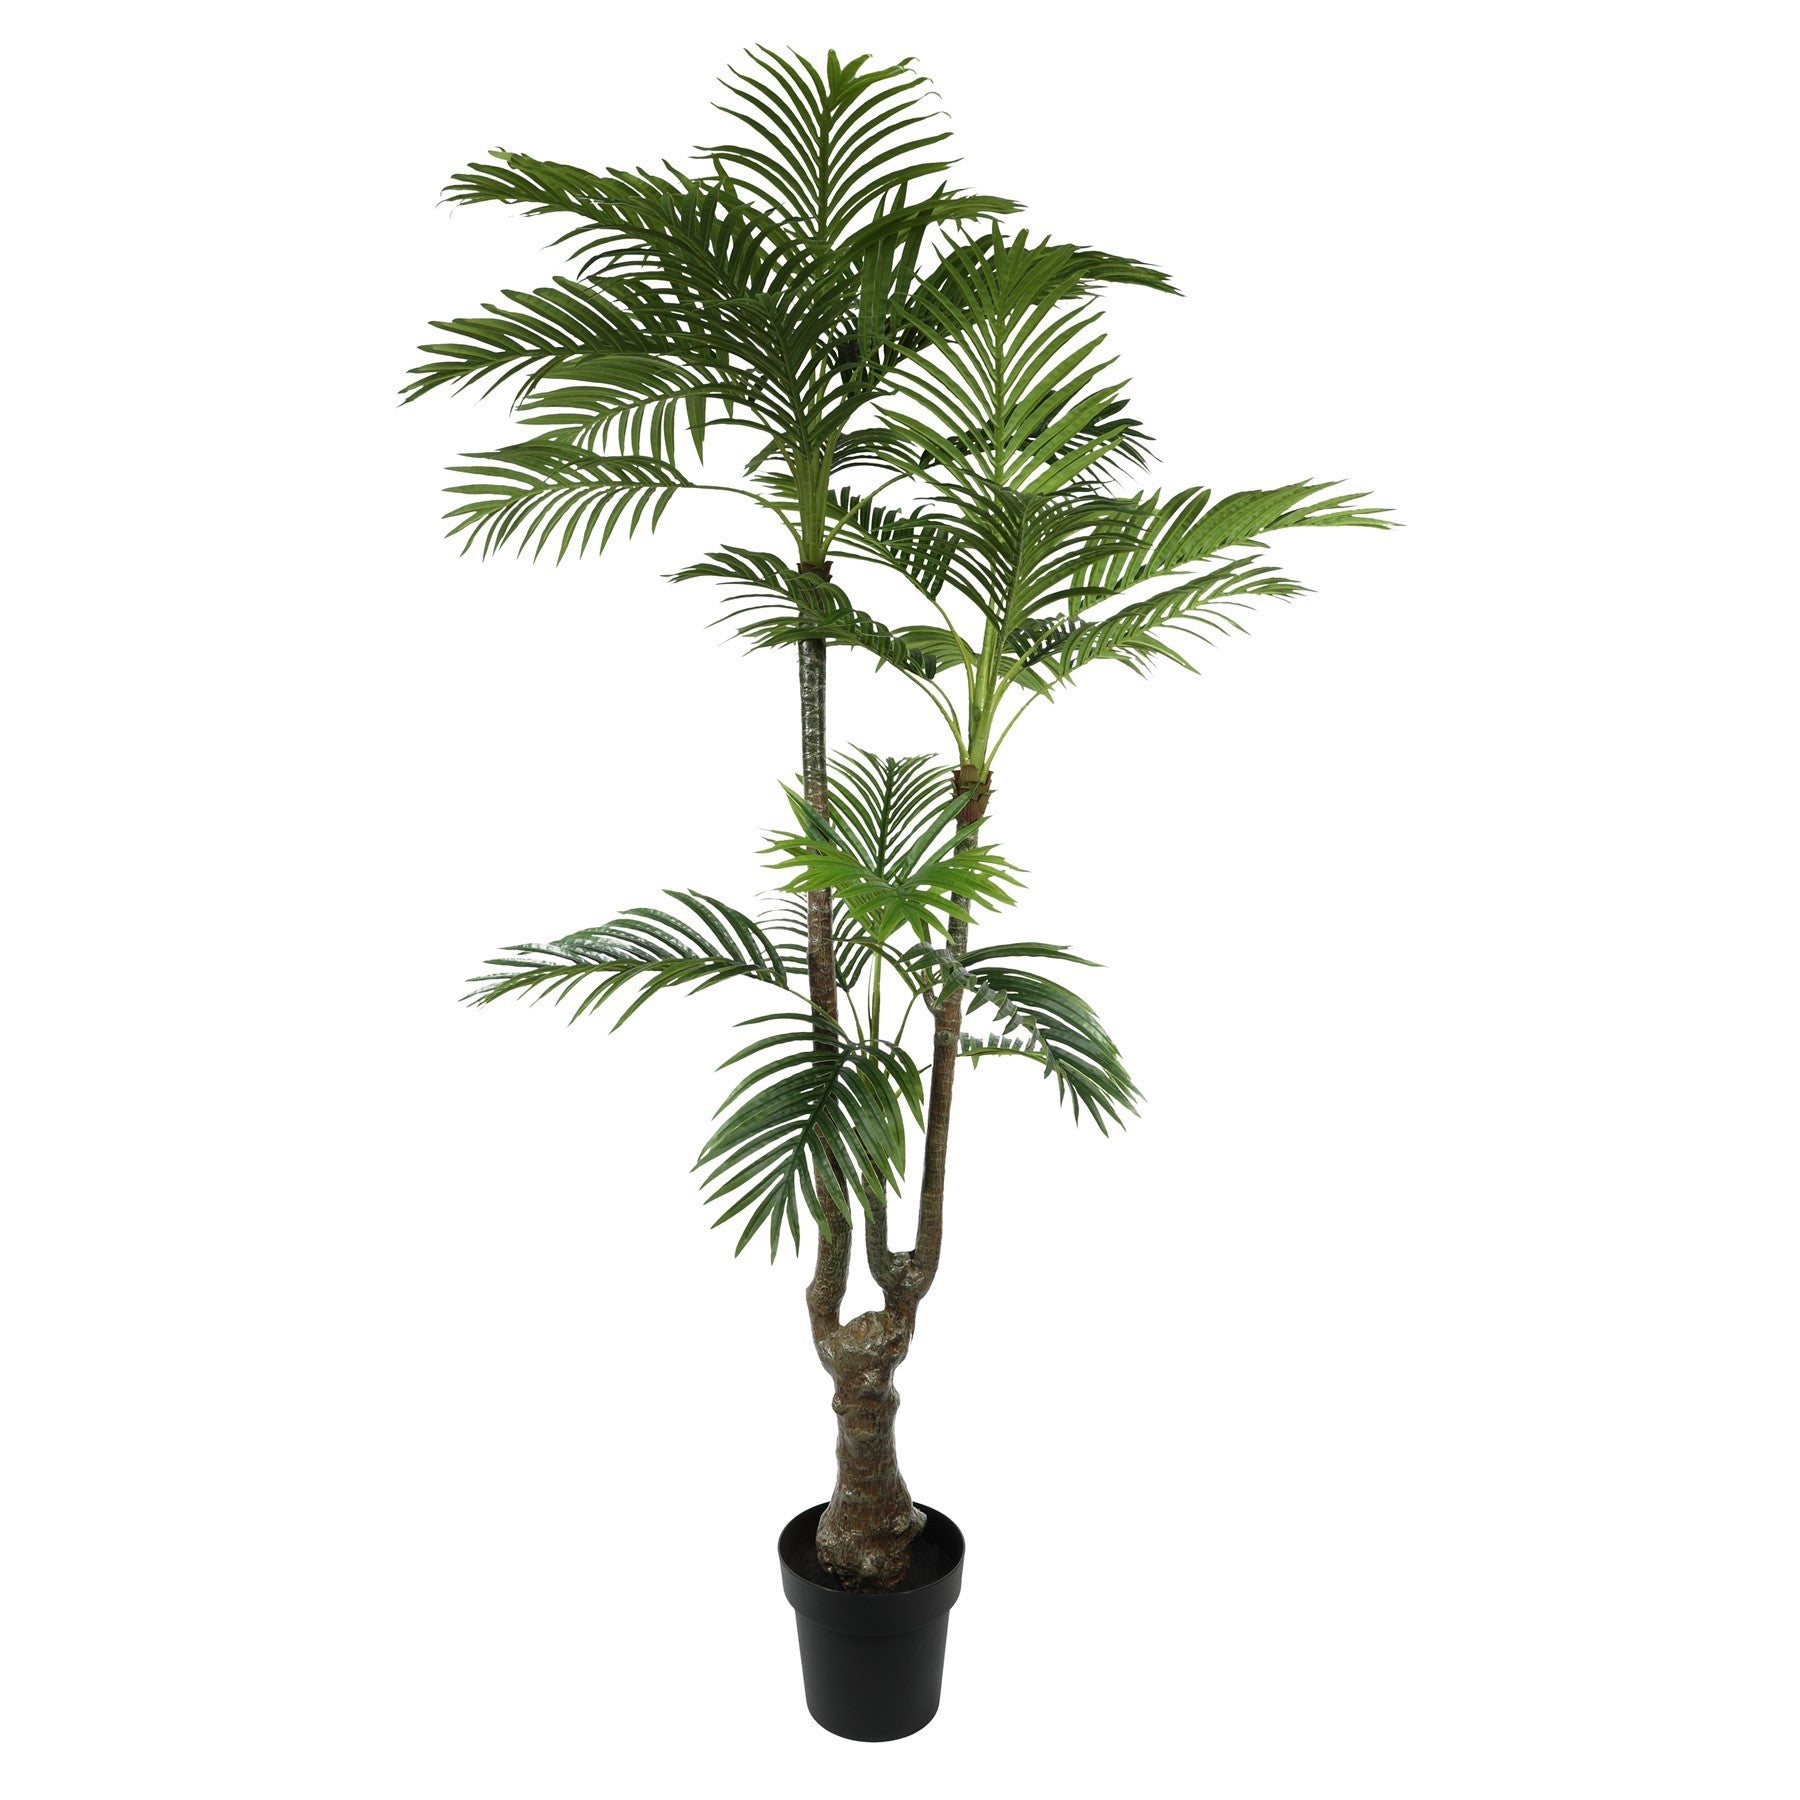 View Palm Potted House Plant 175cm information